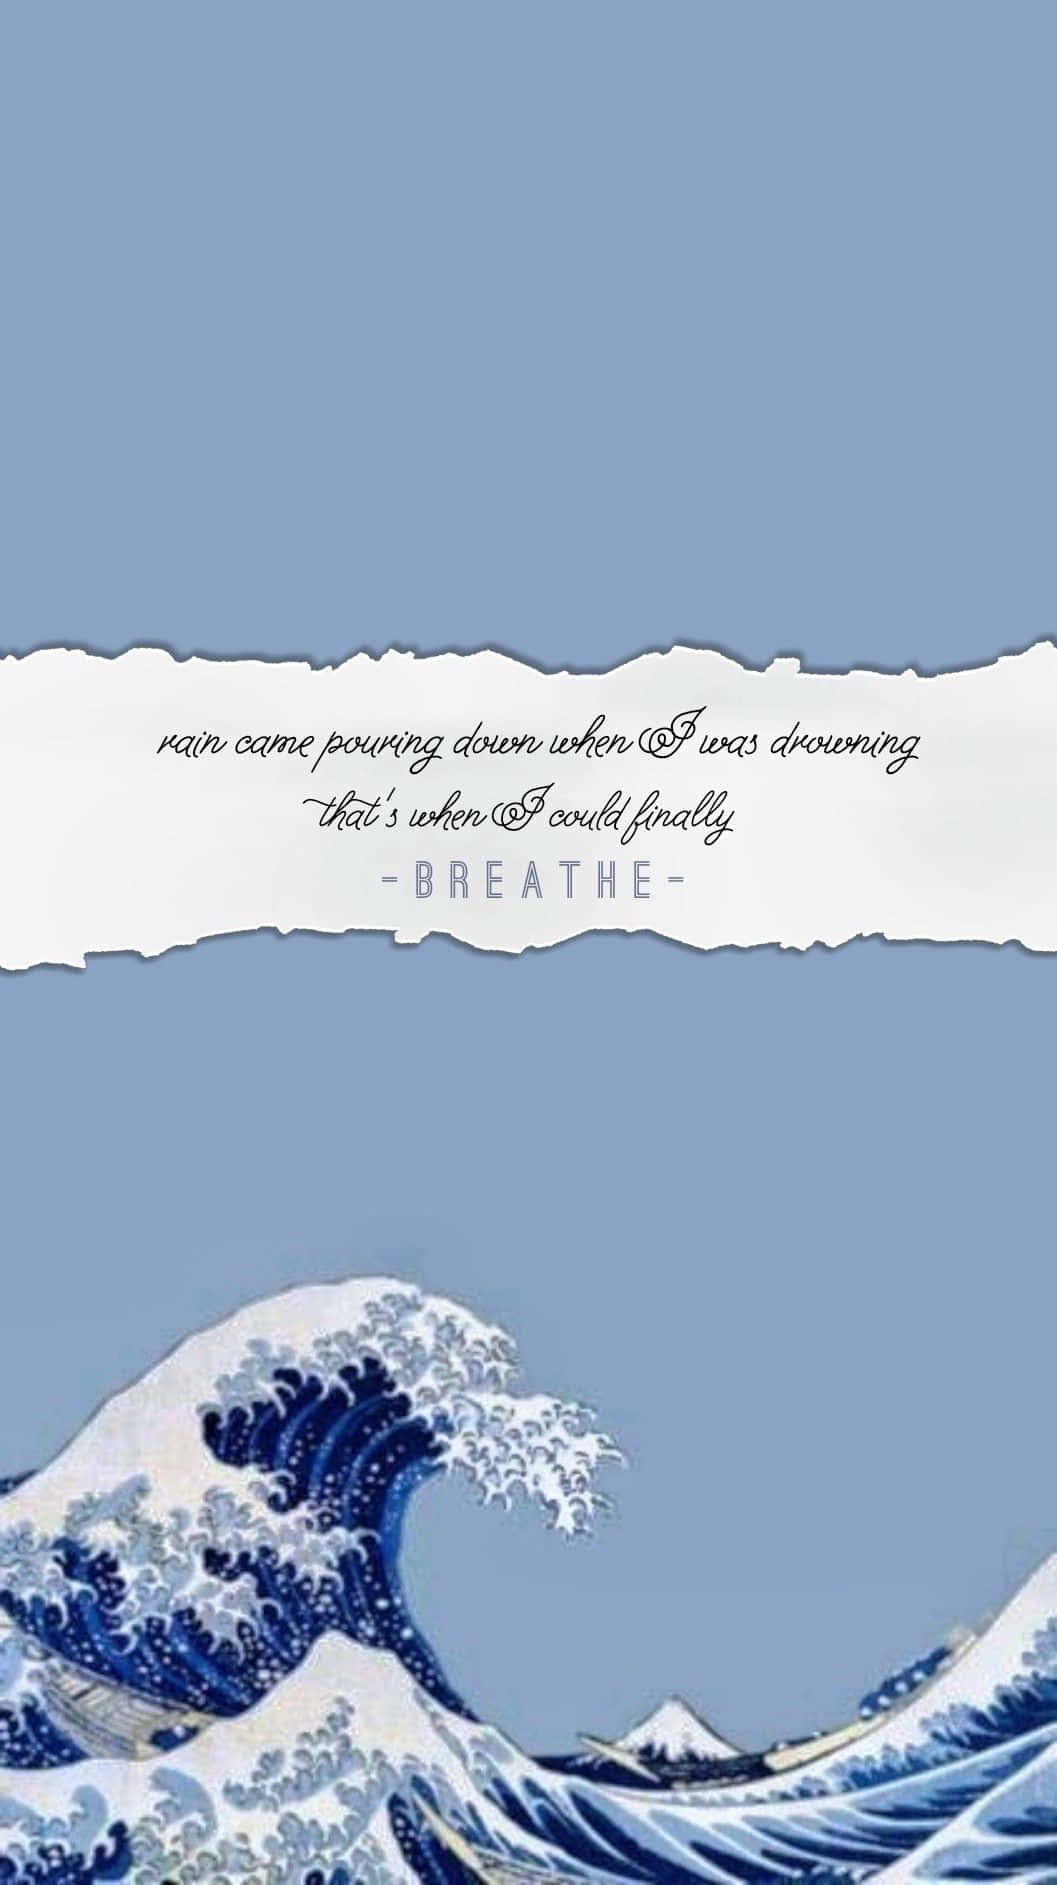 The great wave wallpaper - Taylor Swift